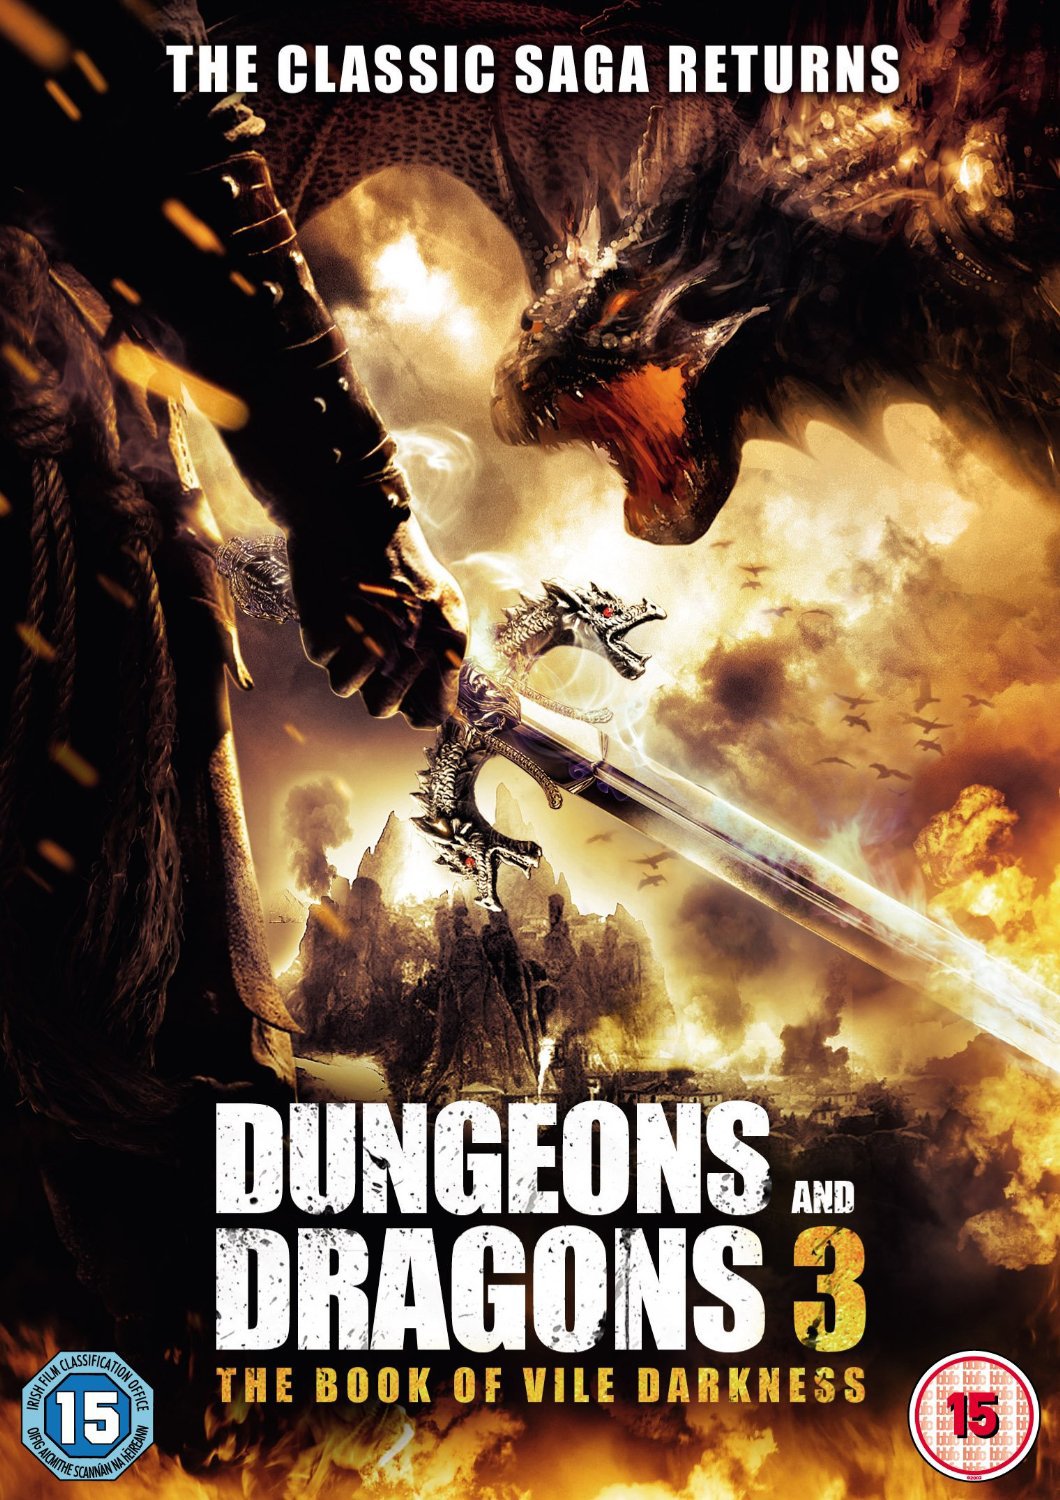 Dungeons & Dragons: The Book of Vile Darkness (2012) Screenshot 2 